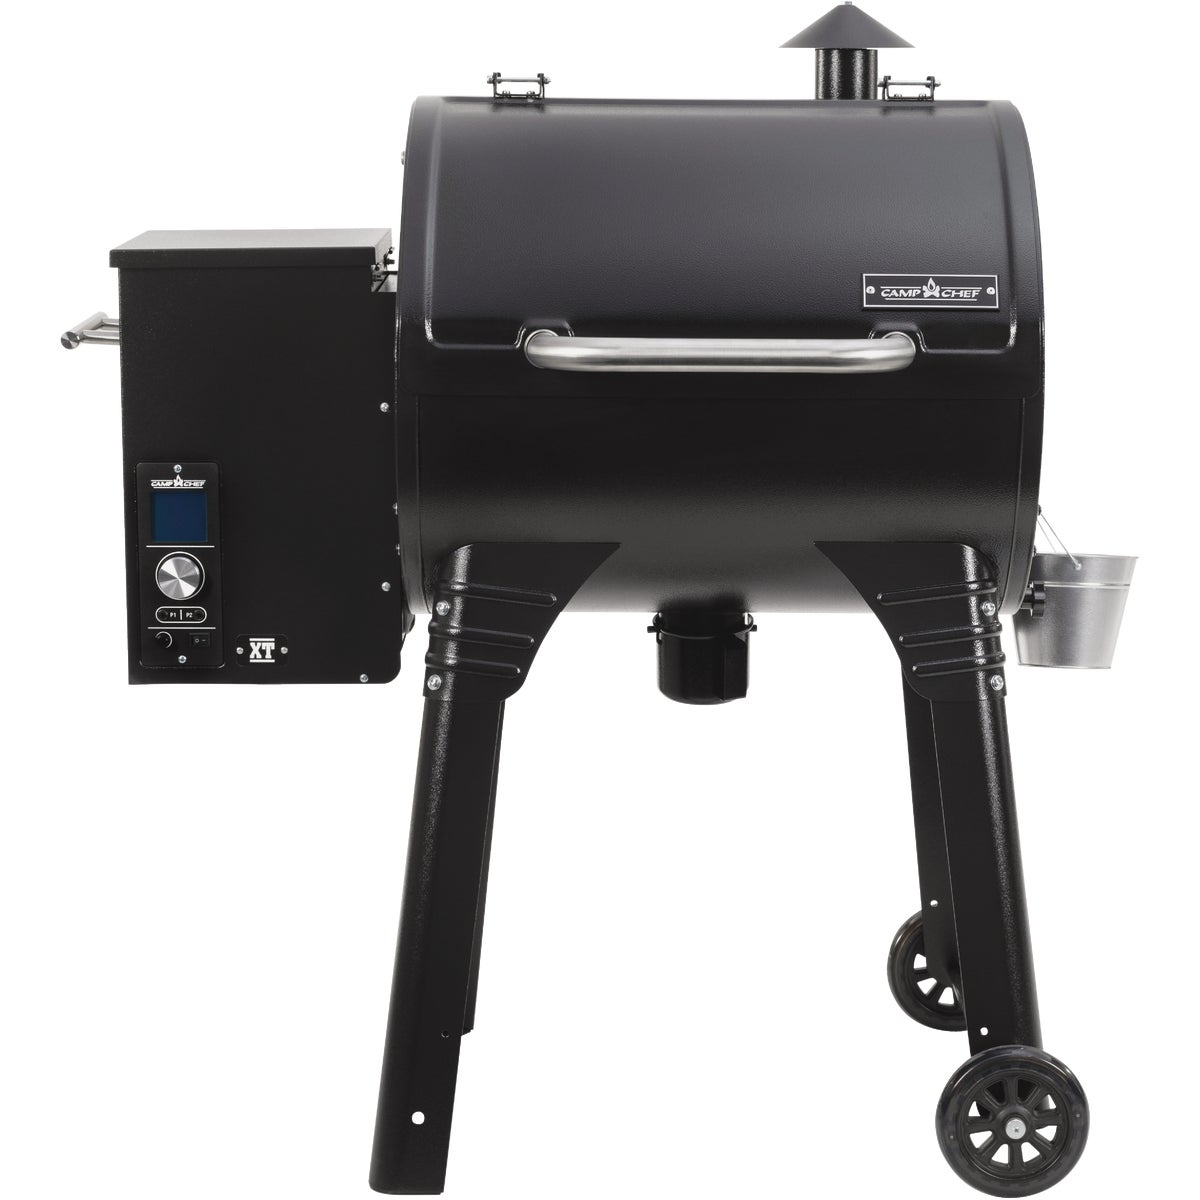 Camp Chef Smokepro XT 24 Black 570 Sq. In. Wood Pellet Grill